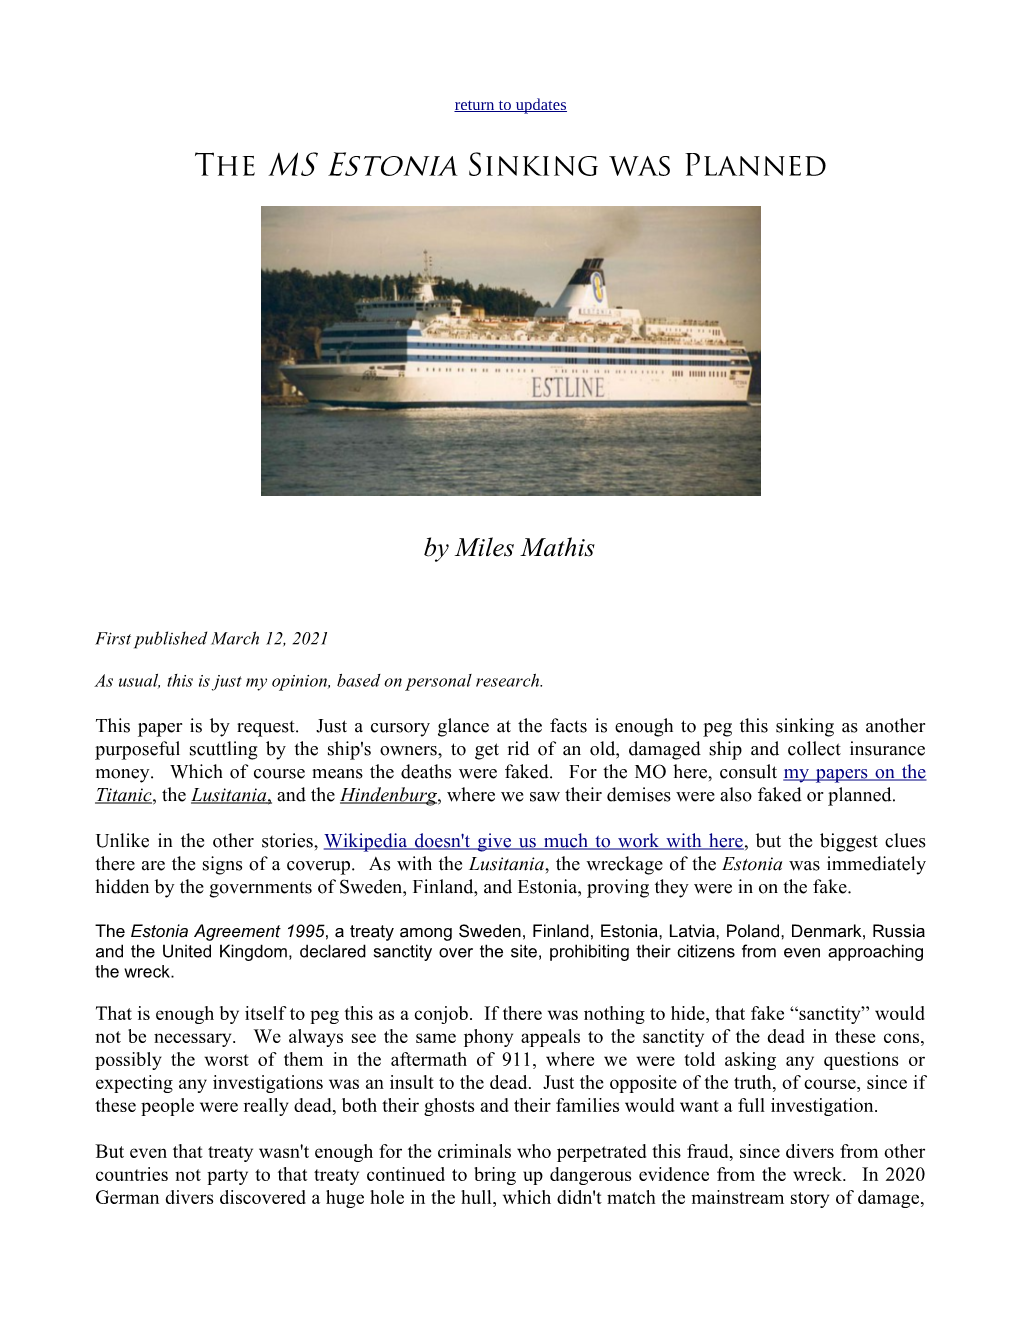 The MS Estonia Sinking Was Planned